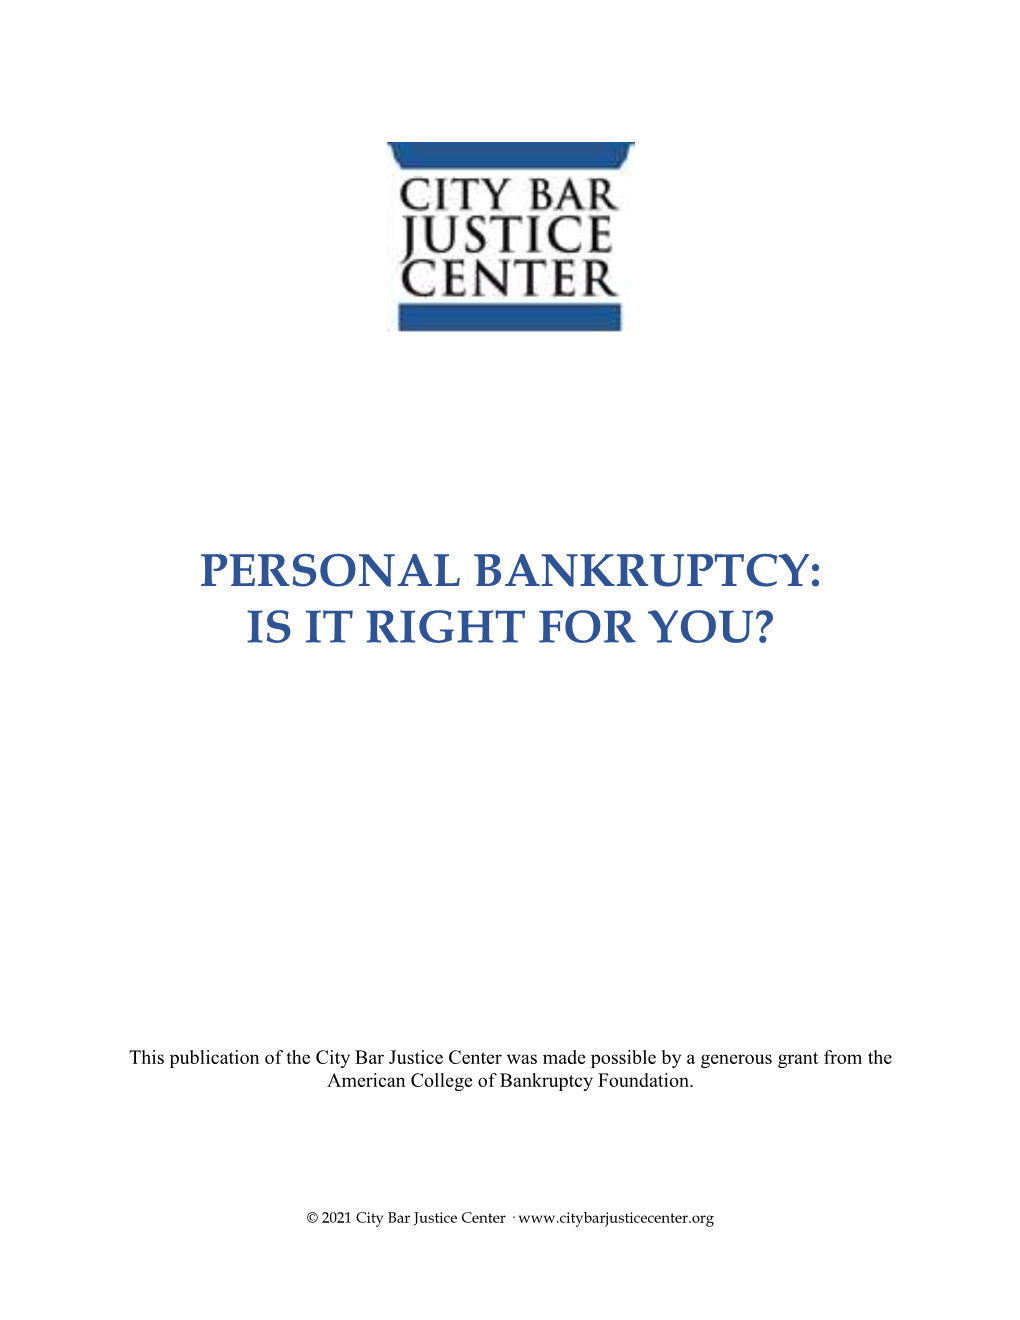 Personal Bankruptcy: Is It Right for You?